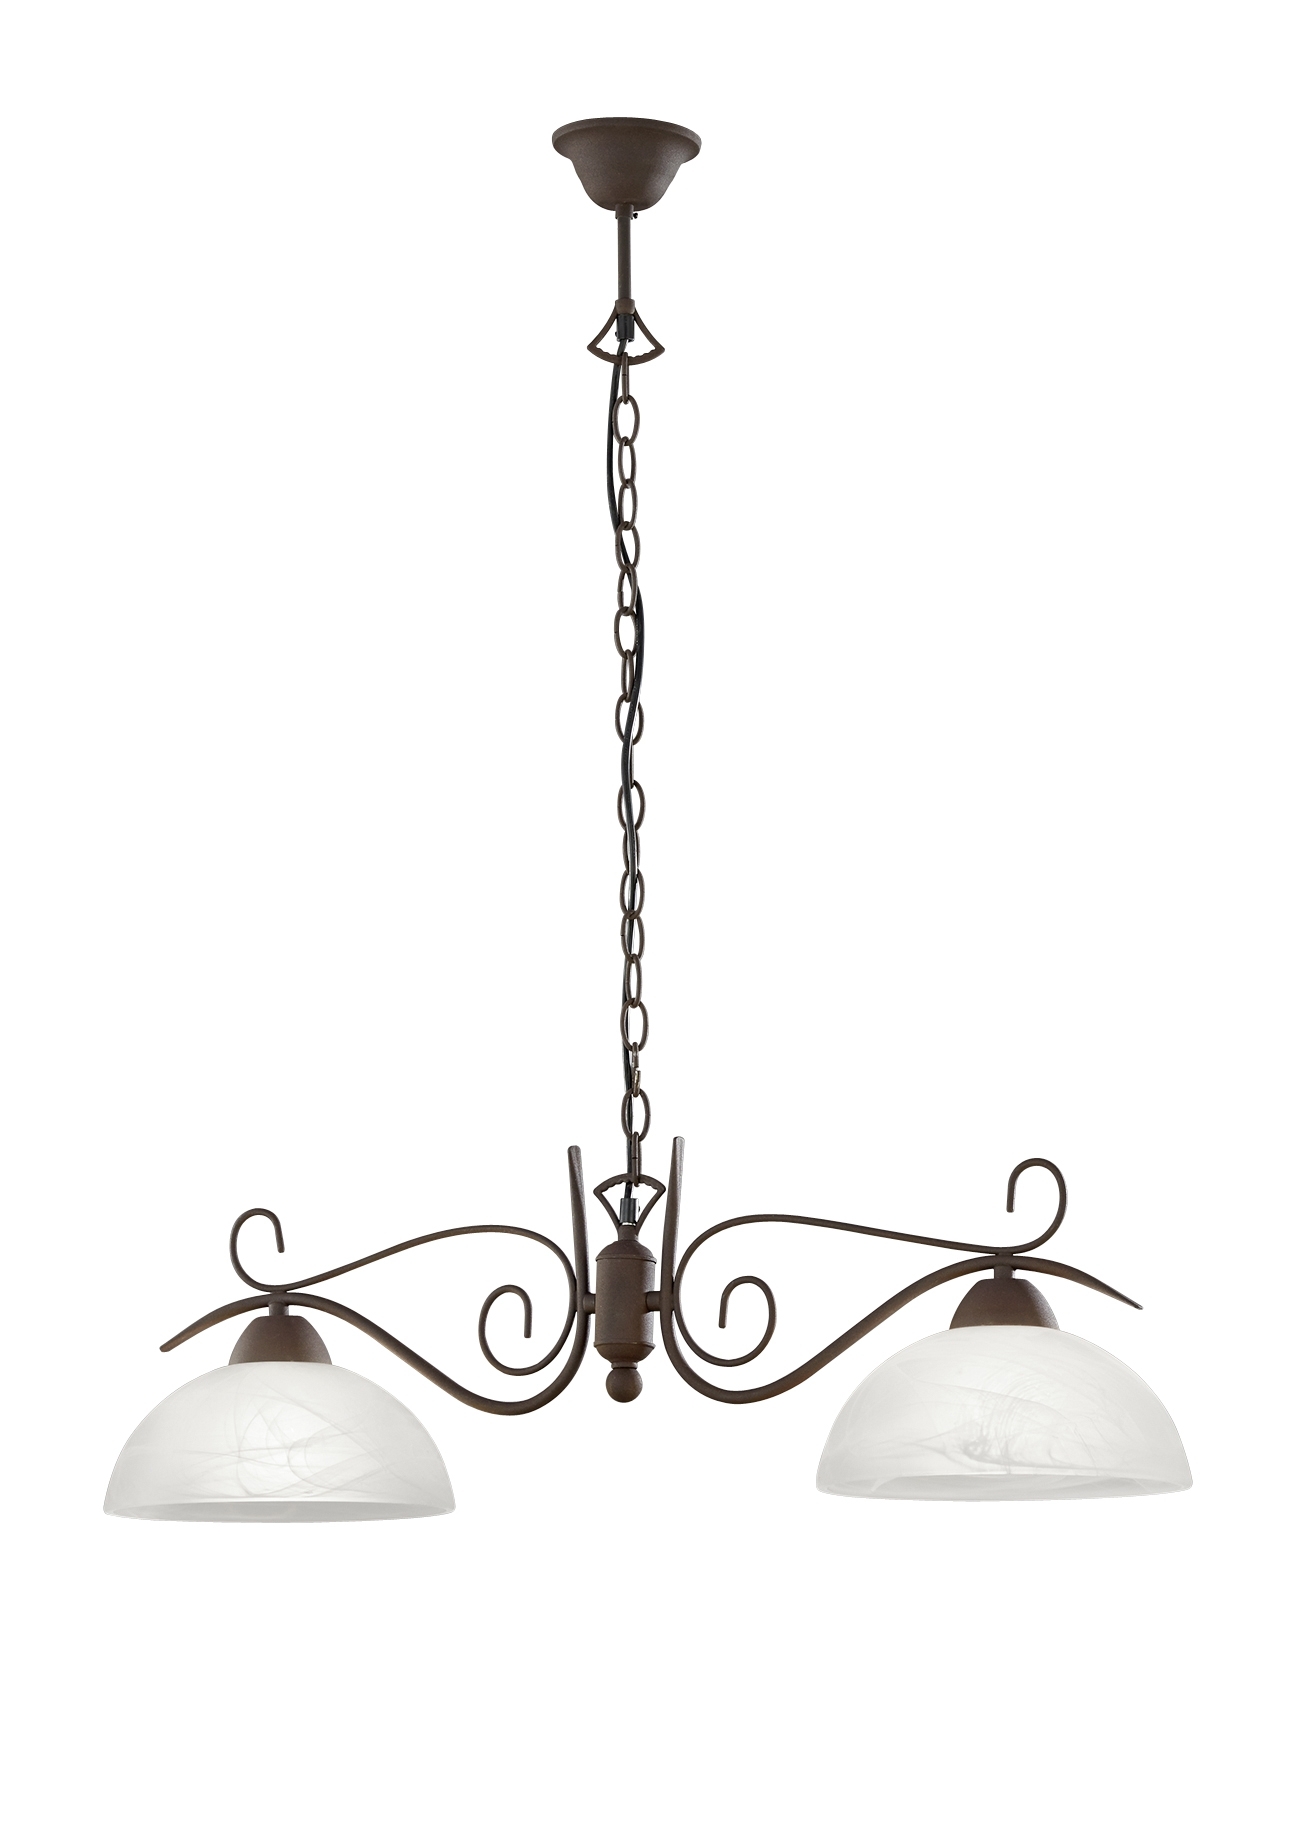 TRIO LEUCHTEN country hanglamp reality by r 3432 24